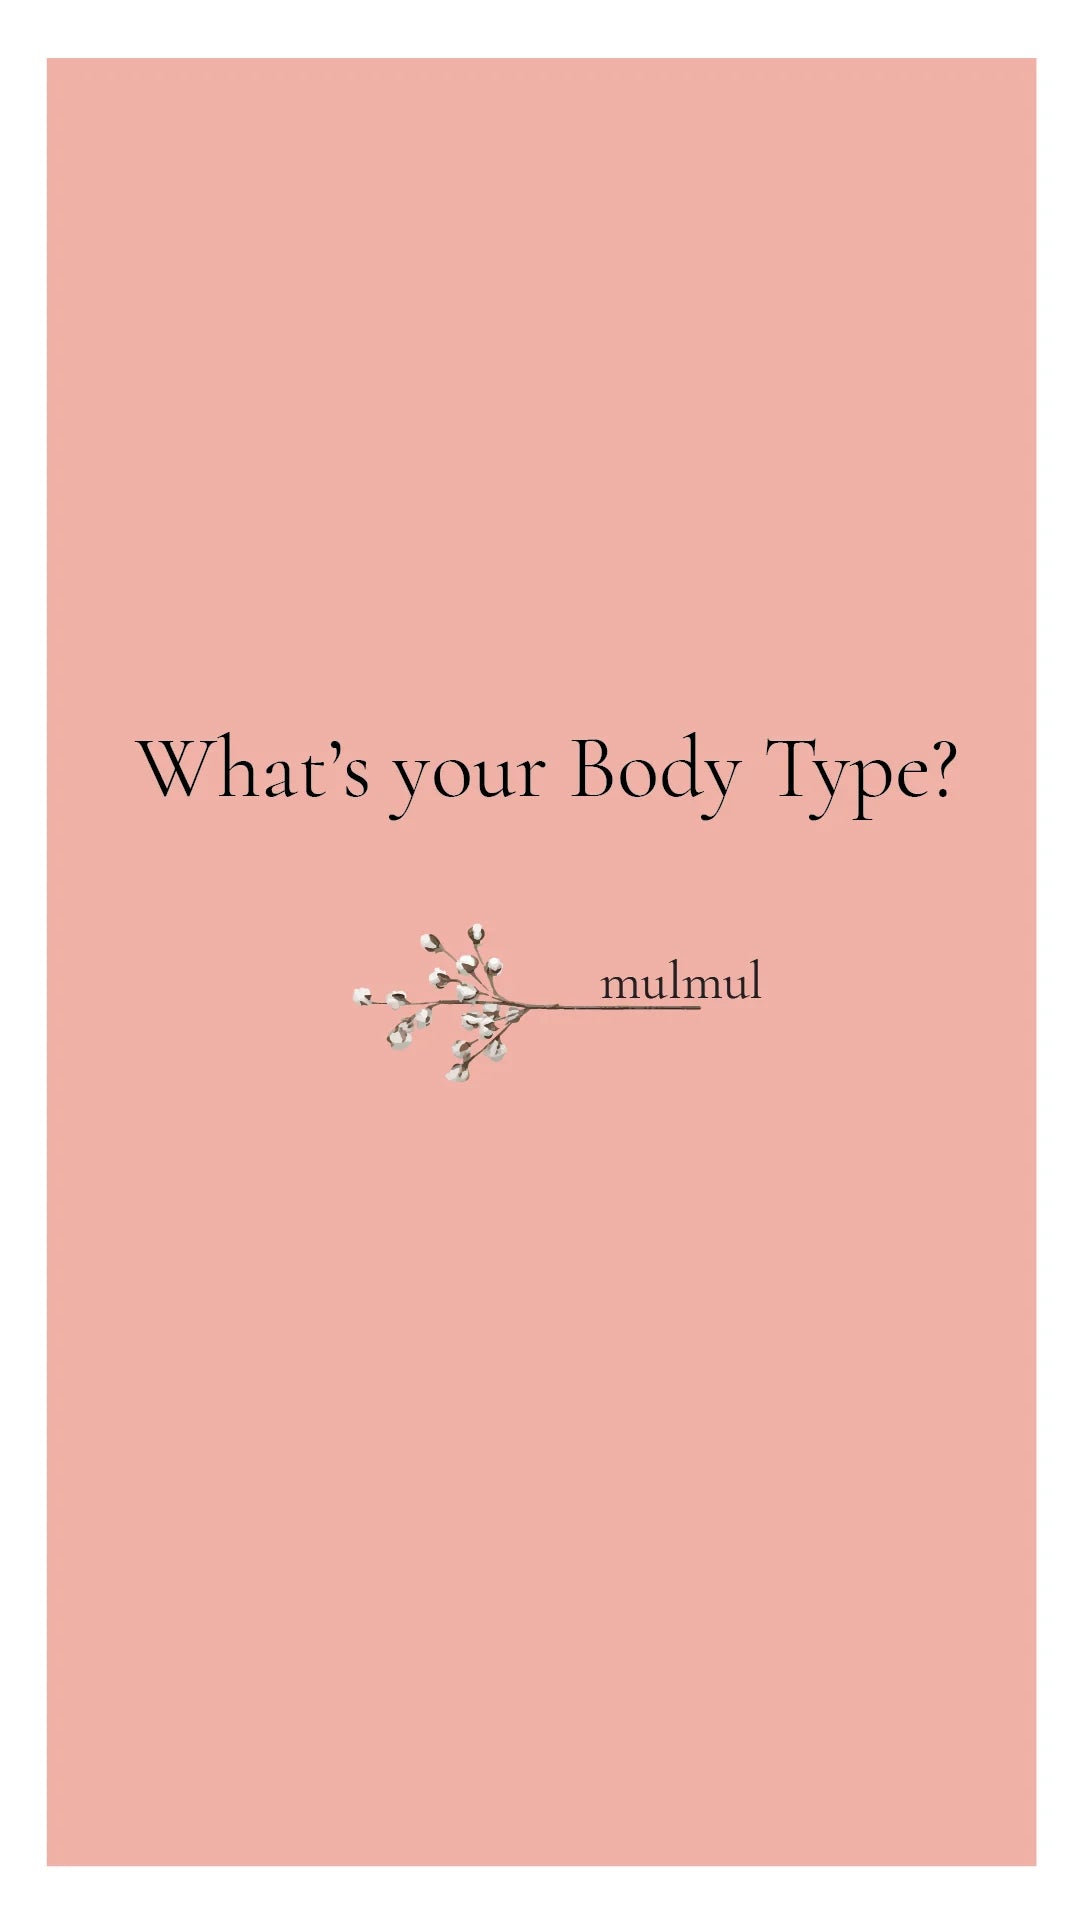 What's your Body Type?